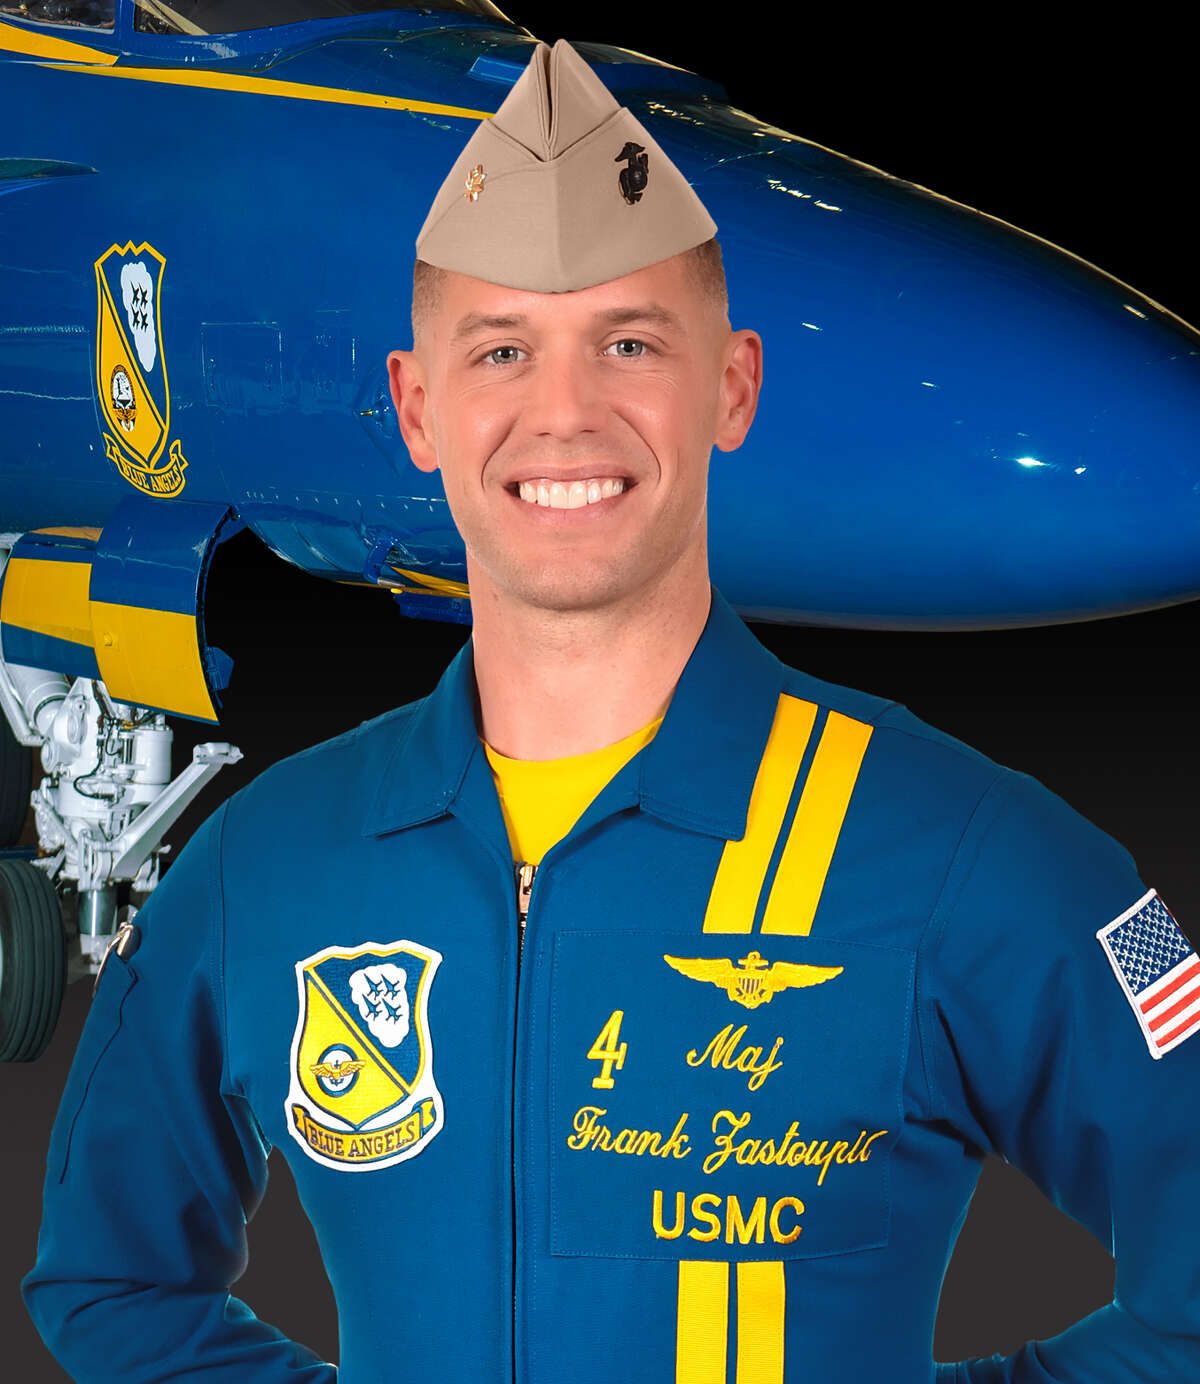 Blue Angels wear yellow flight suits to commemorate 75 years